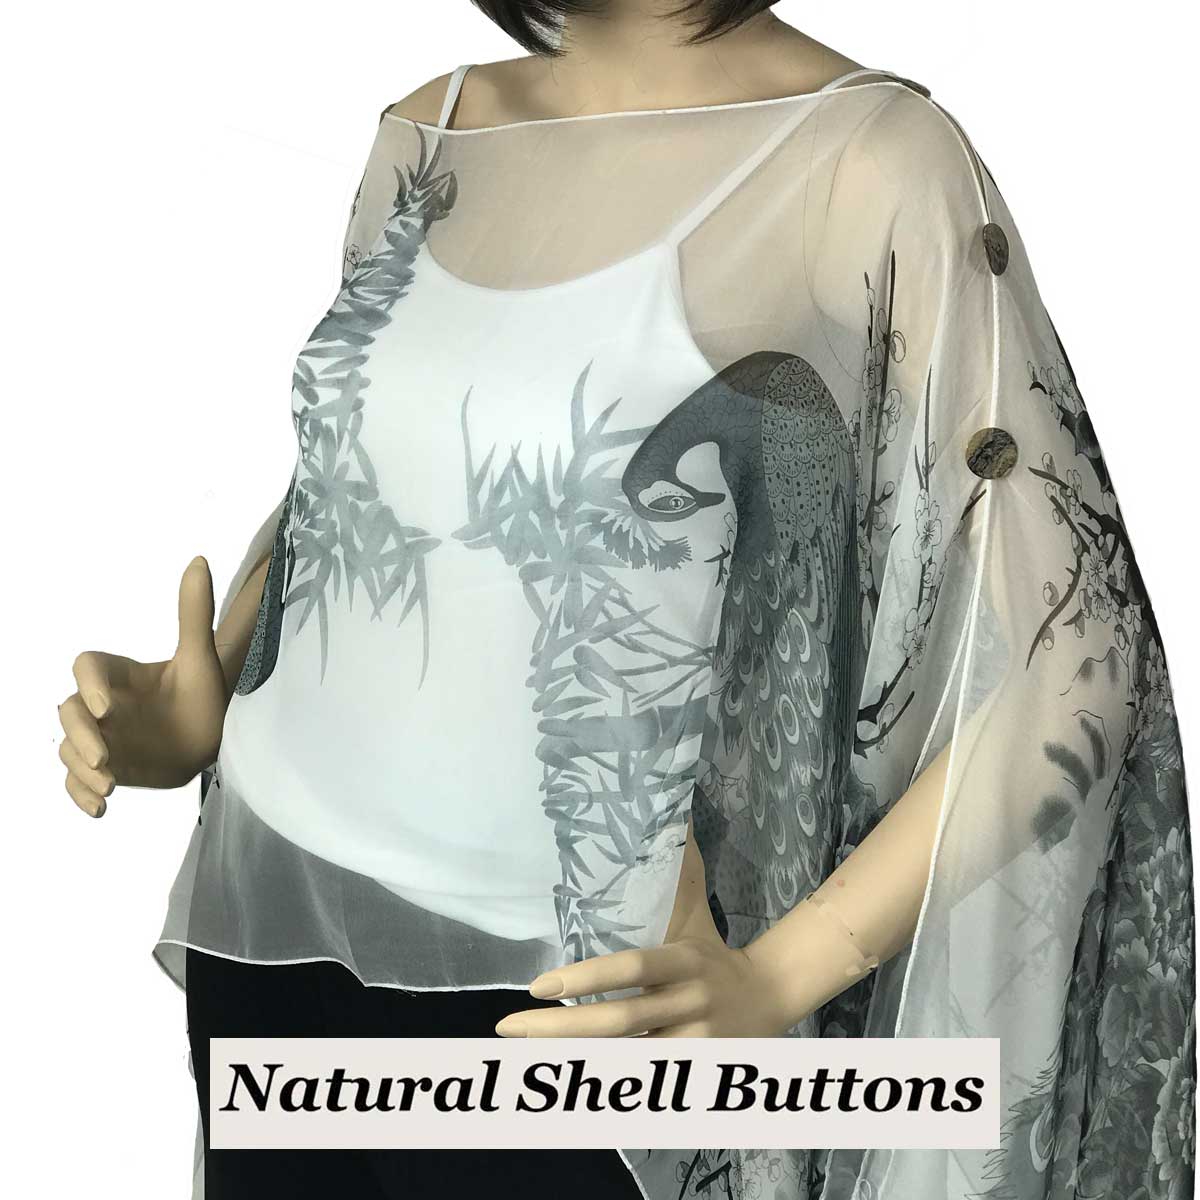 Natural Shell Buttons #115 White-Black (Peacock)